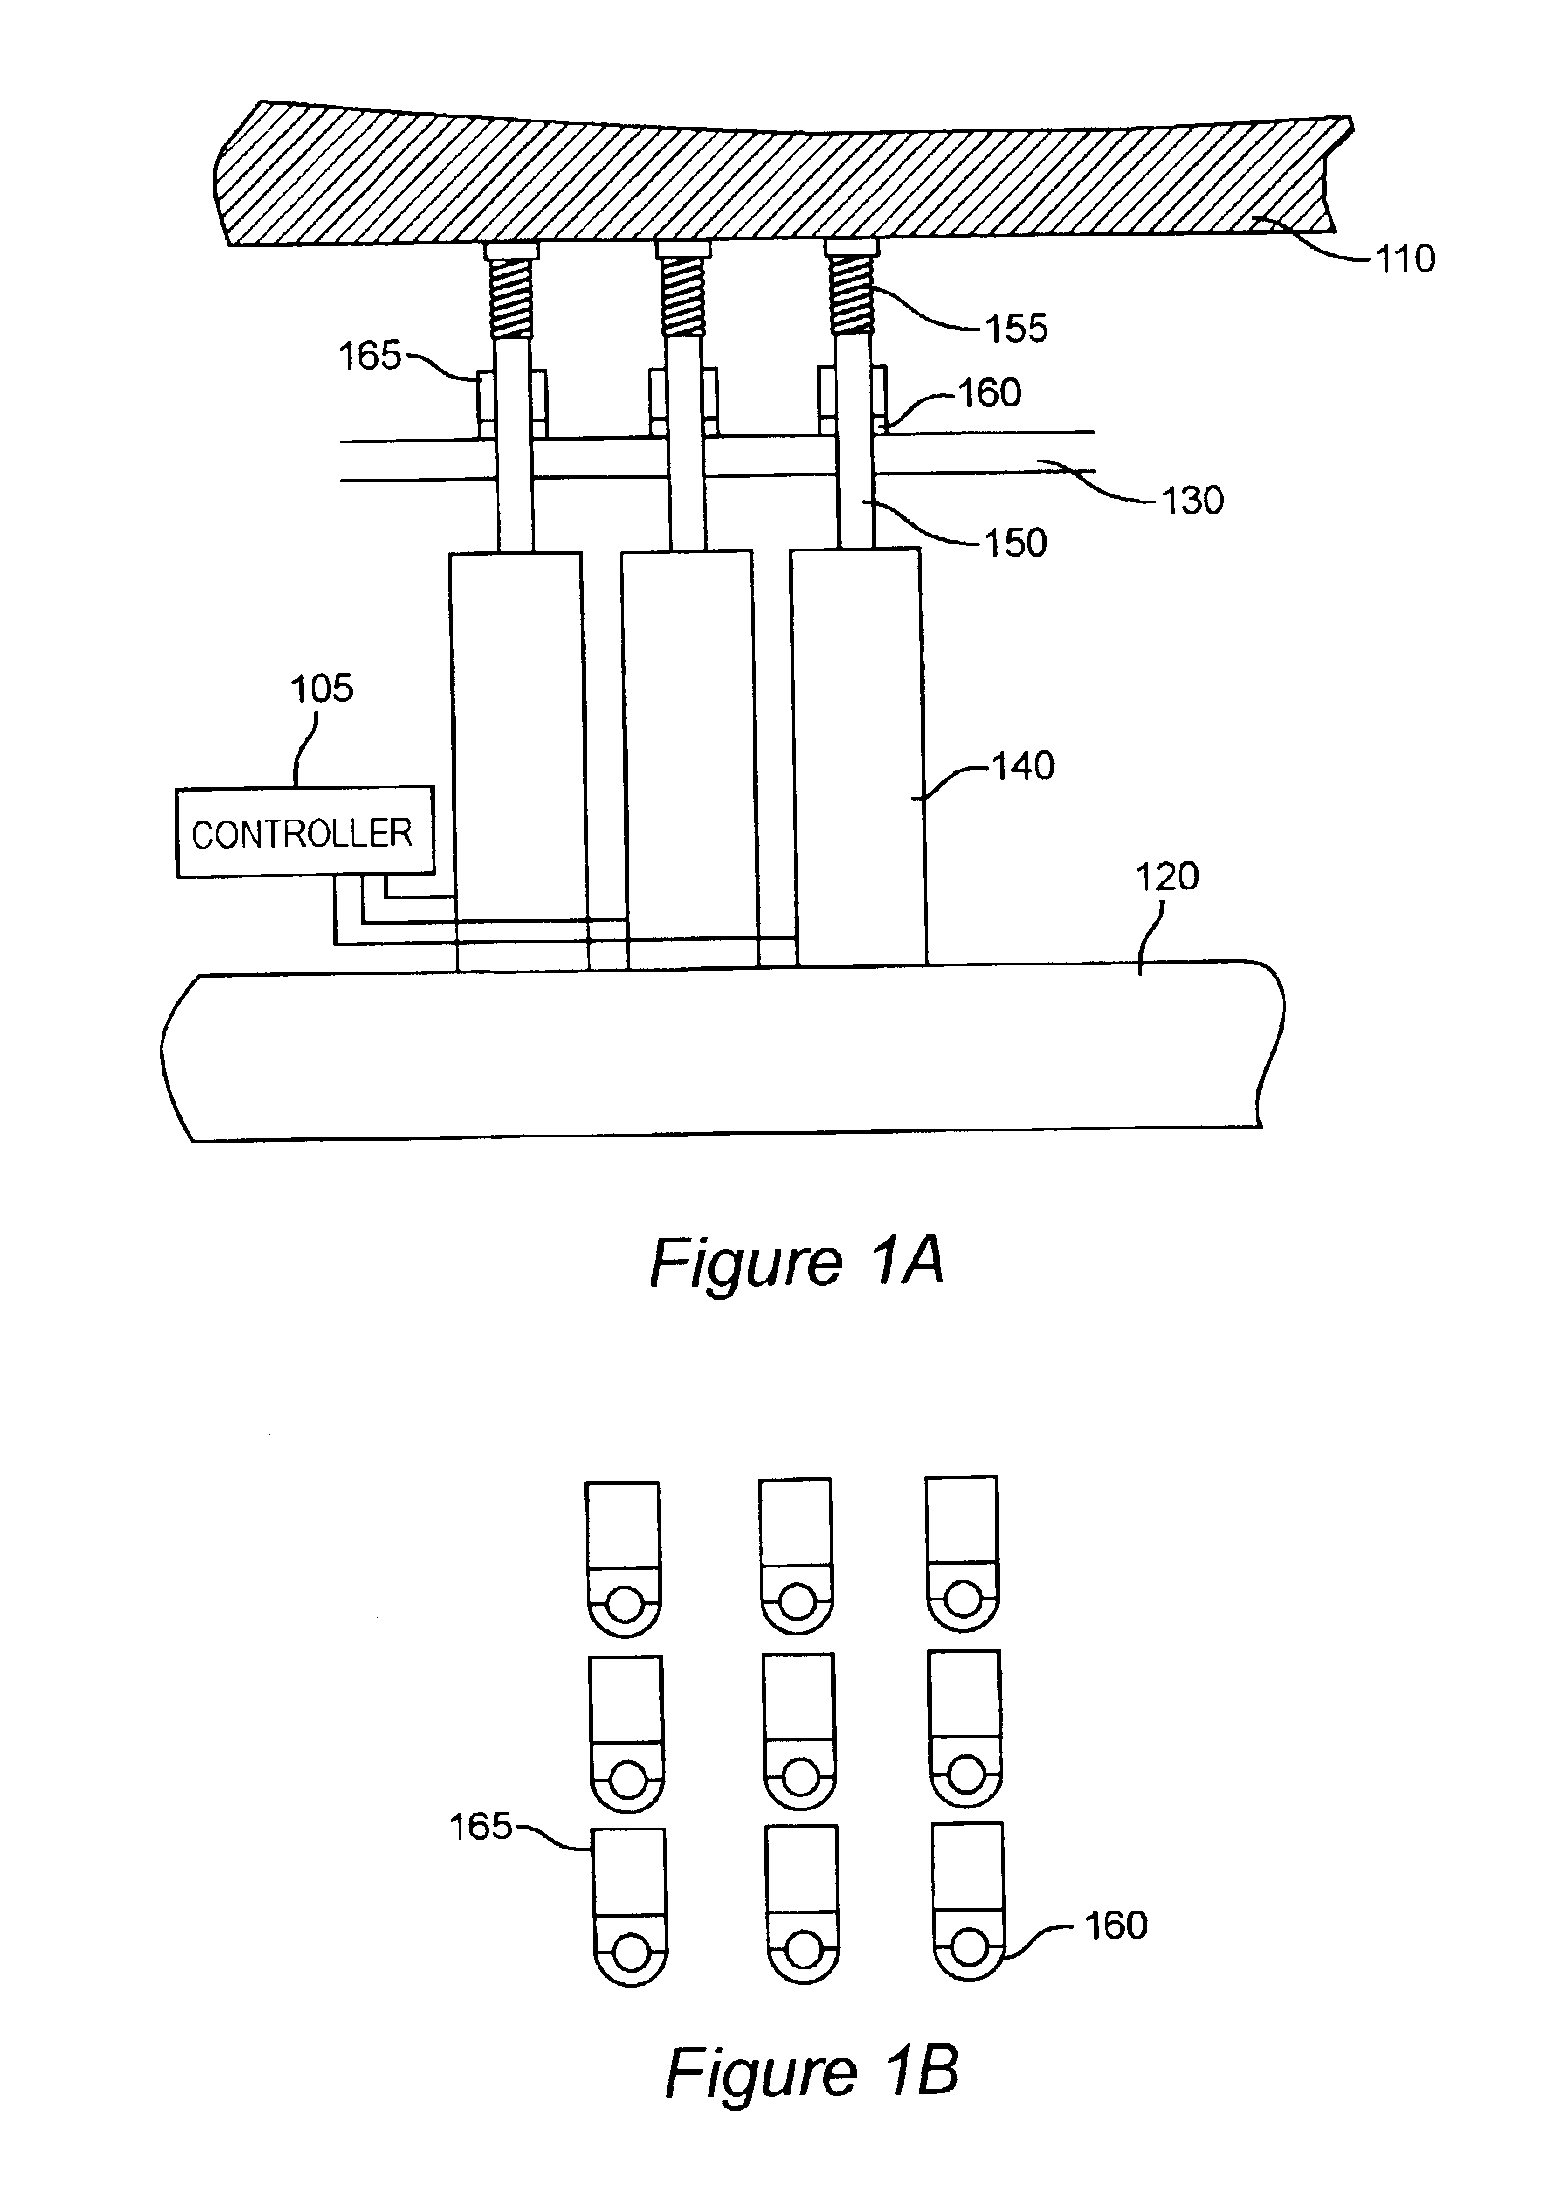 Deformable mirror actuation system